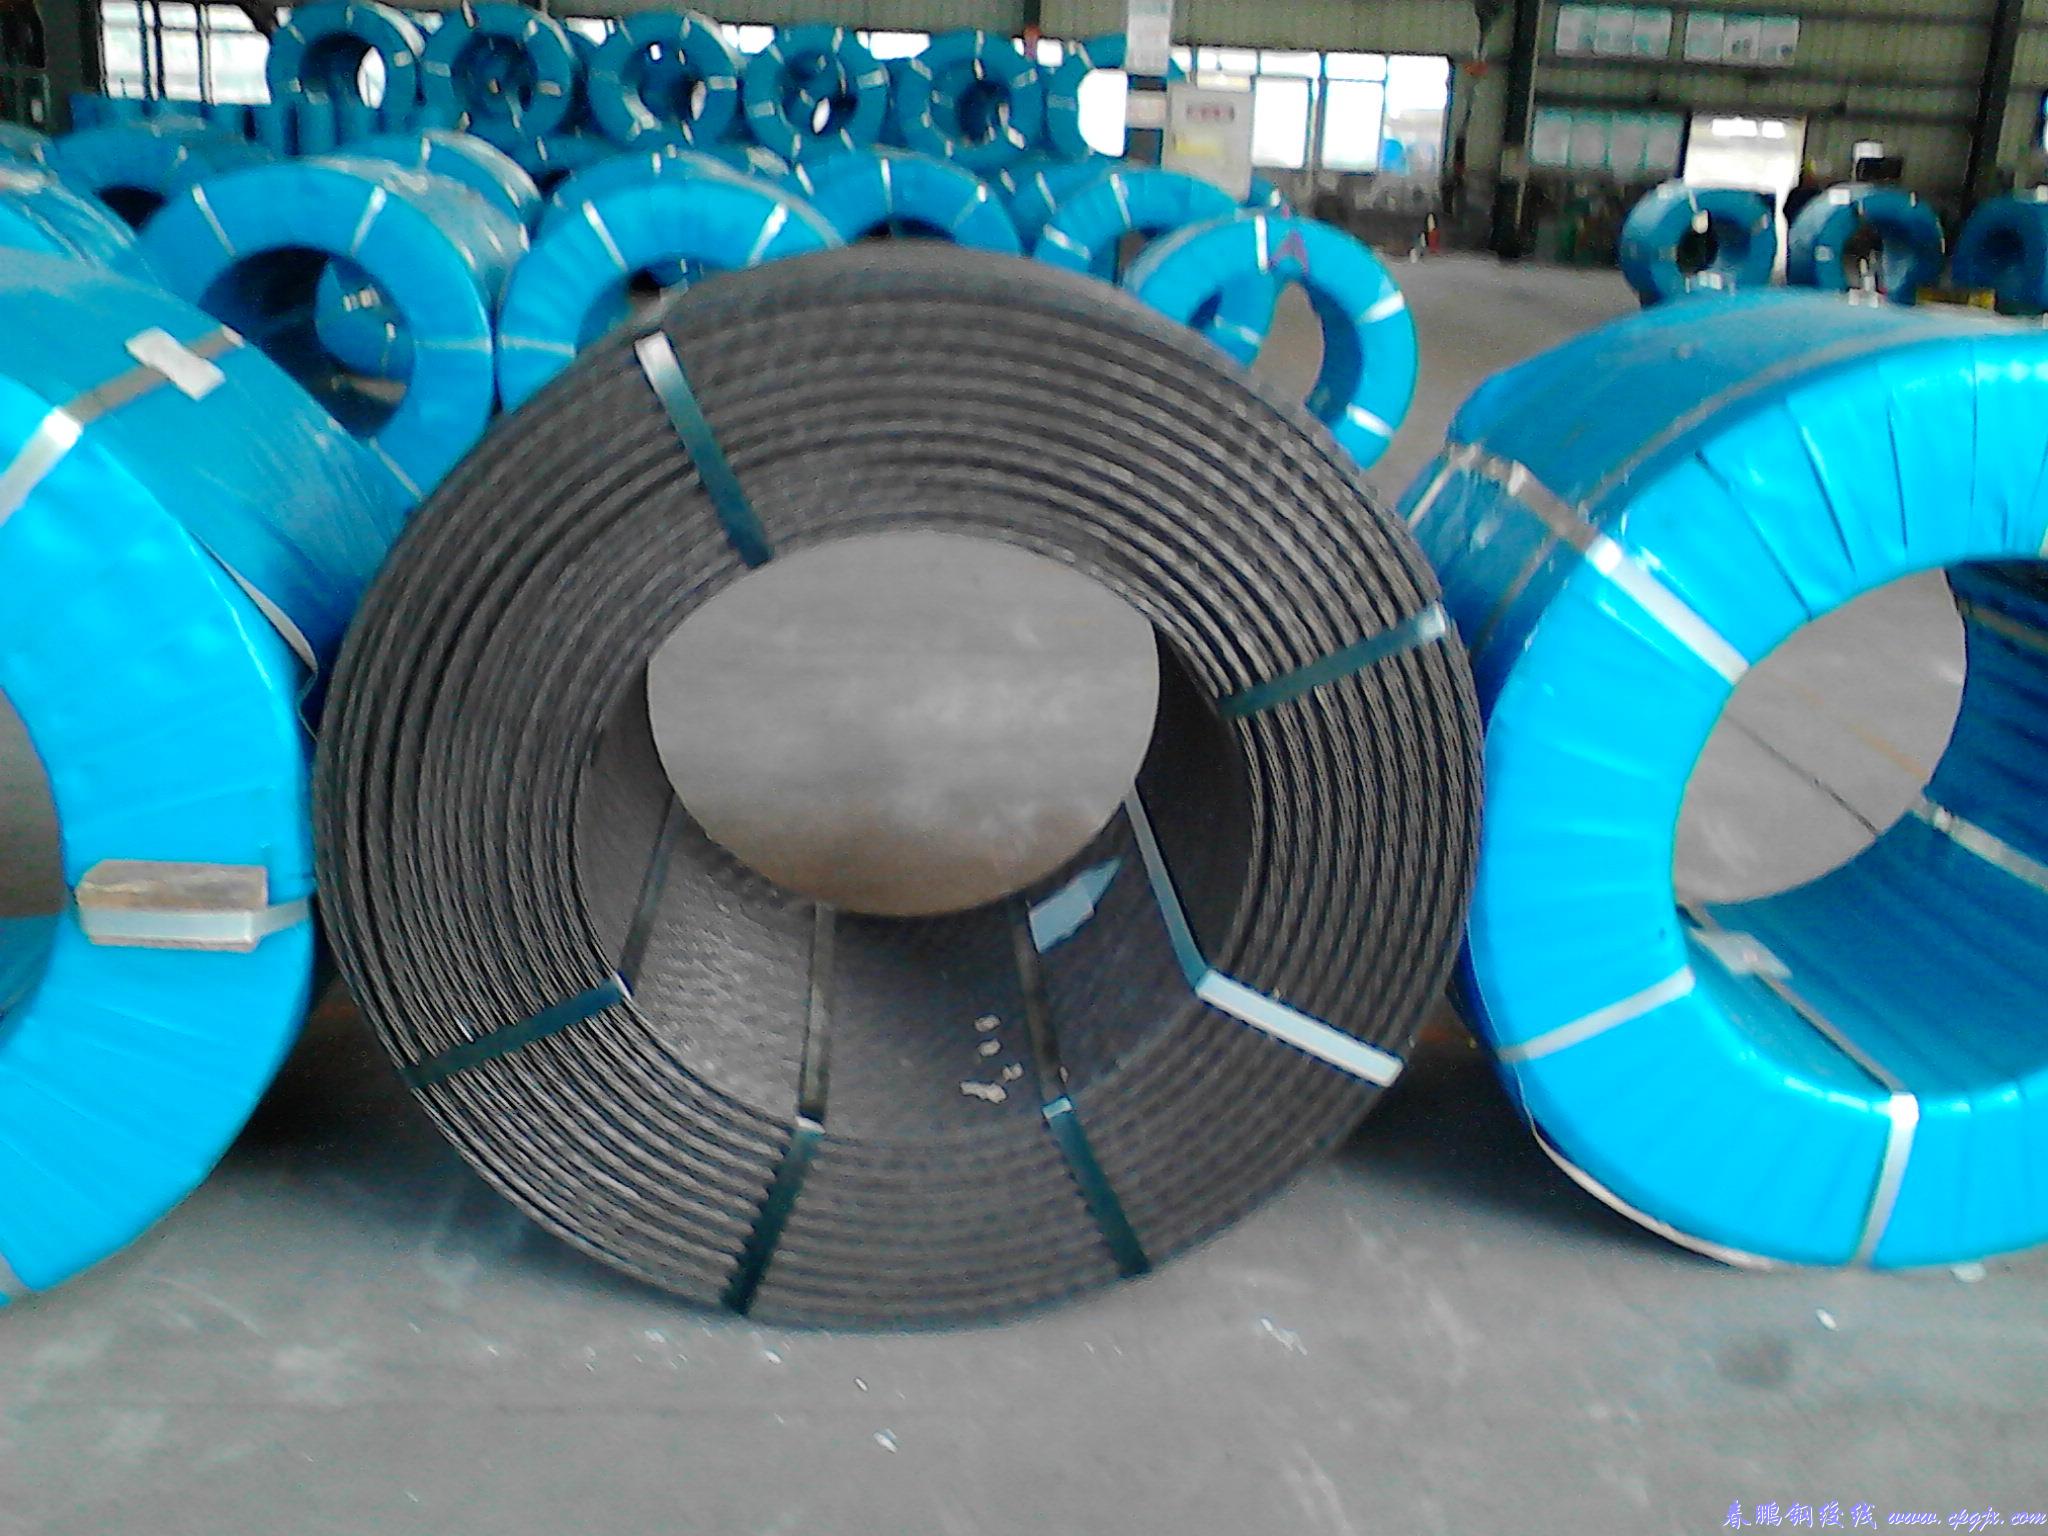   Non bonded prestressed steel strand used in what parts